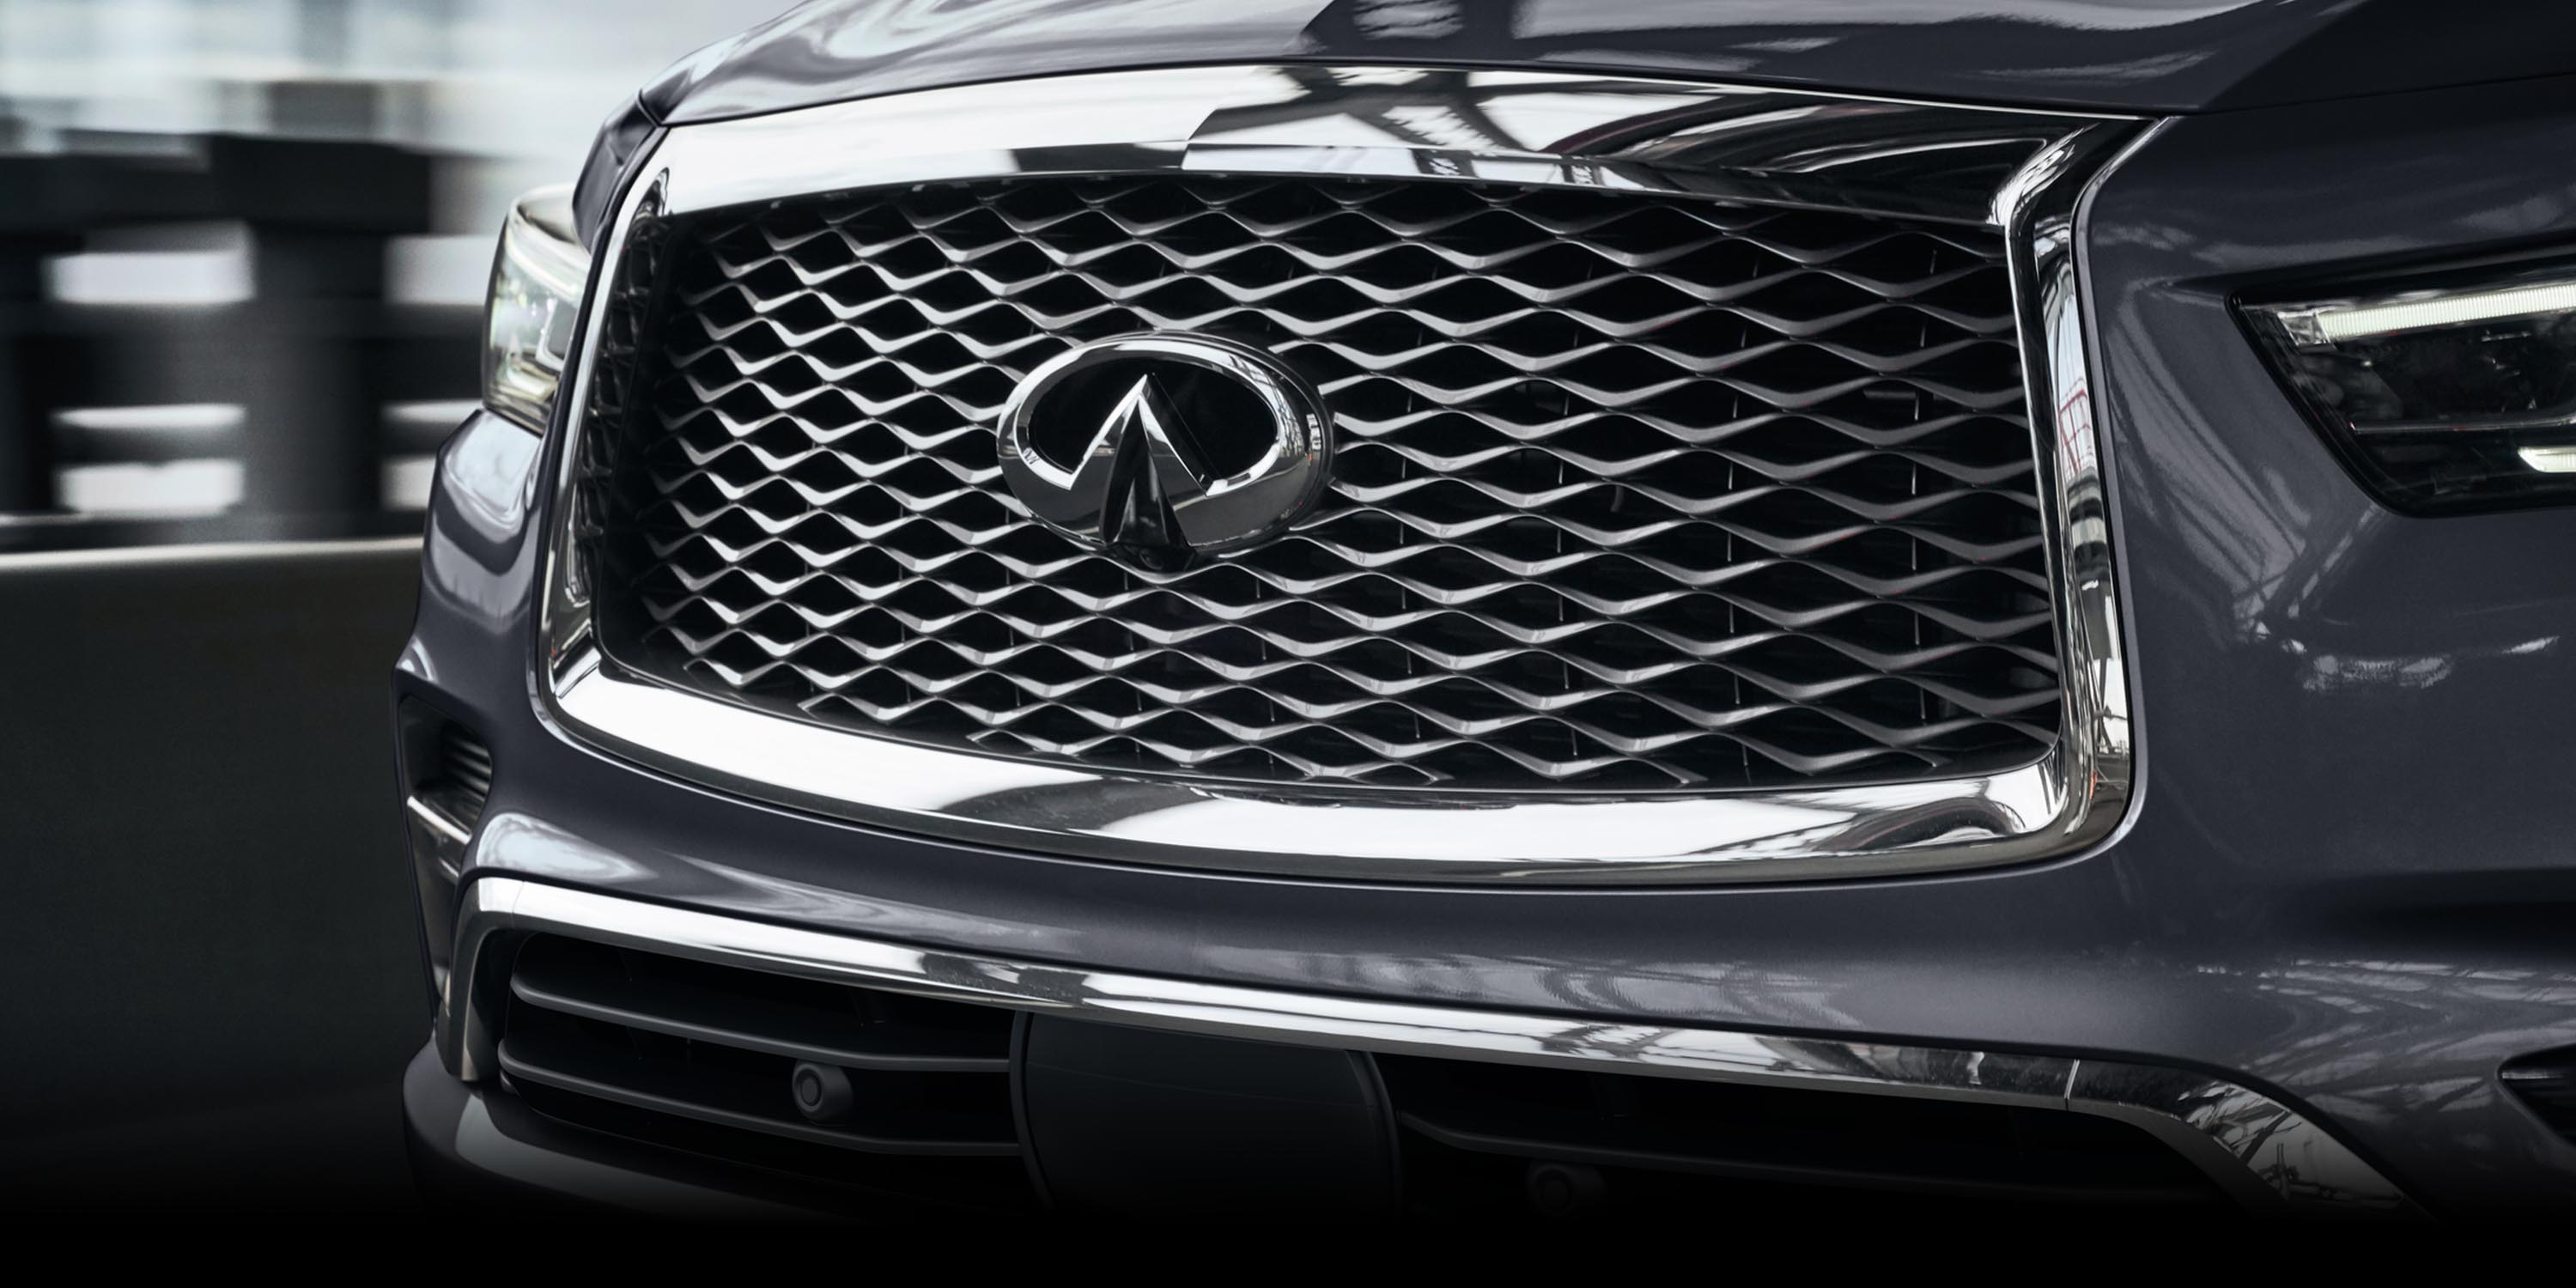 Close-up of the 2022 INFINITI QX80 SUV front grille and logo.